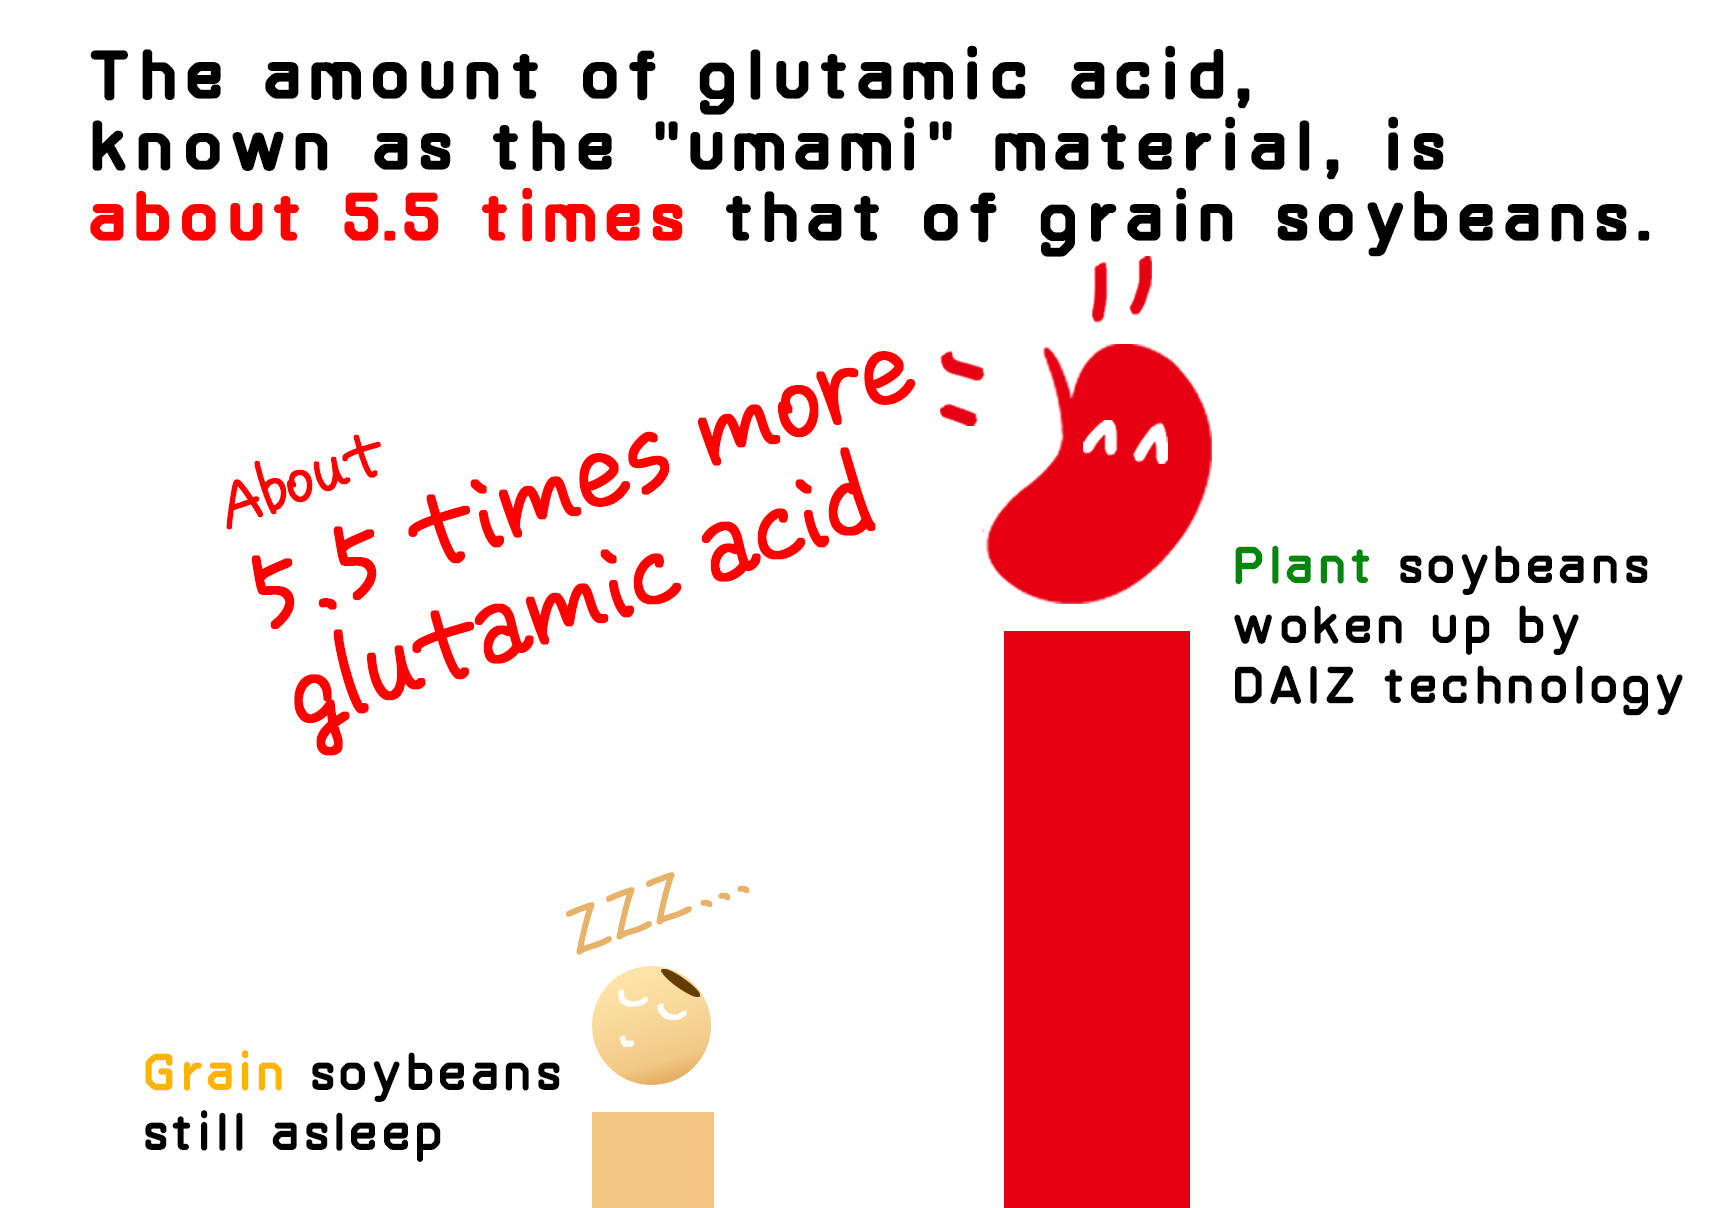 The amount of glutamic acid, knowmos the " Umami"  material, is known as the " umami"  material, is about 5.5 times that of grain soybeans.